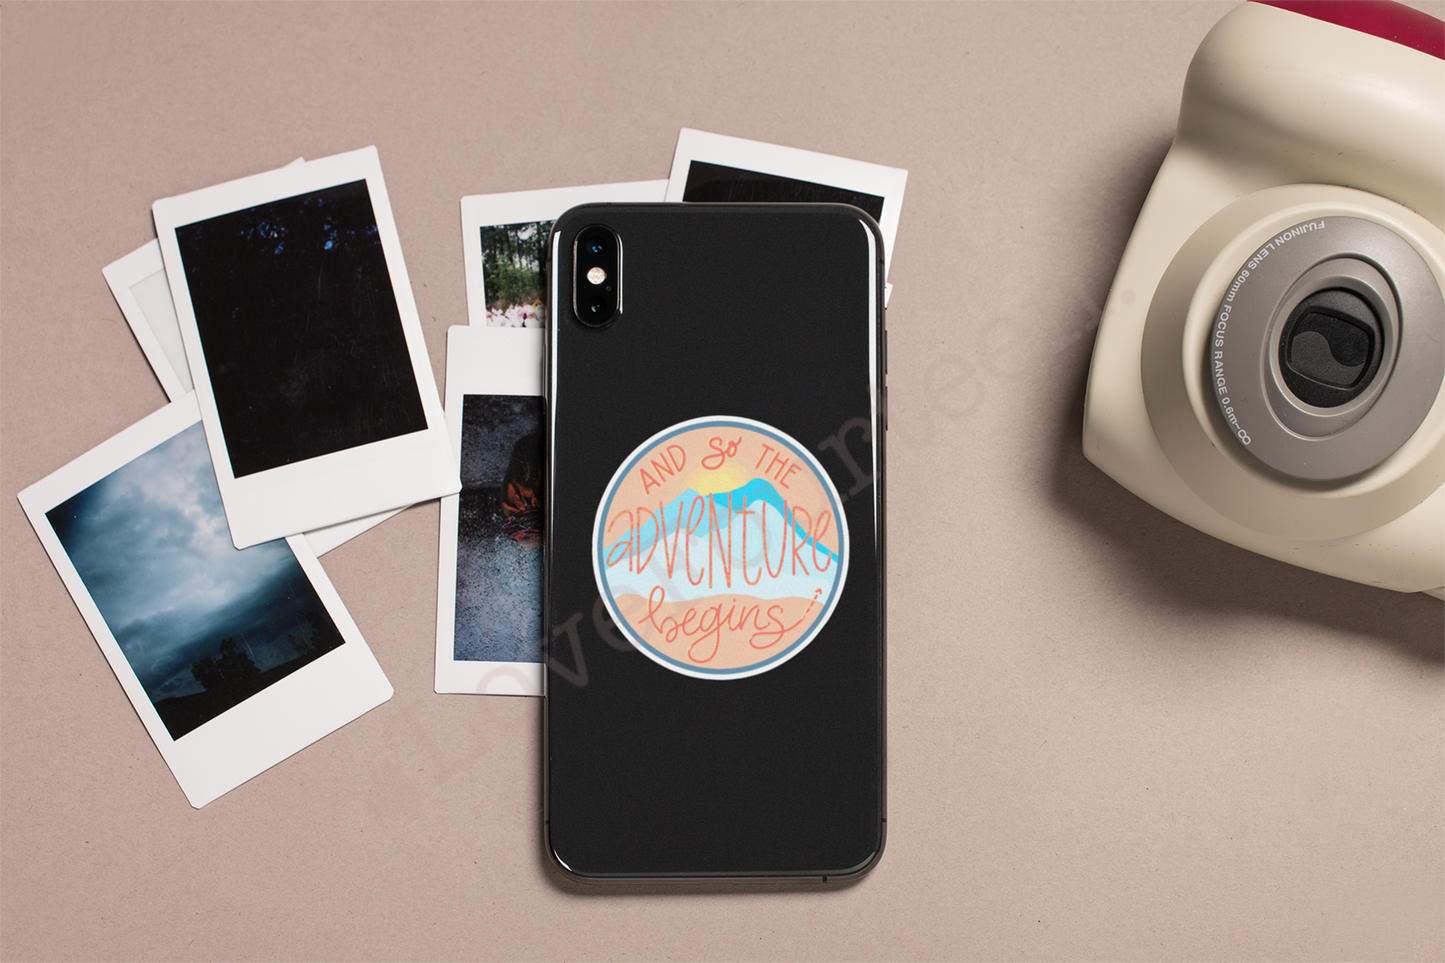 polaroid camera and smartphone with waterproof die cut sticker saying "and so the adventure begins" 